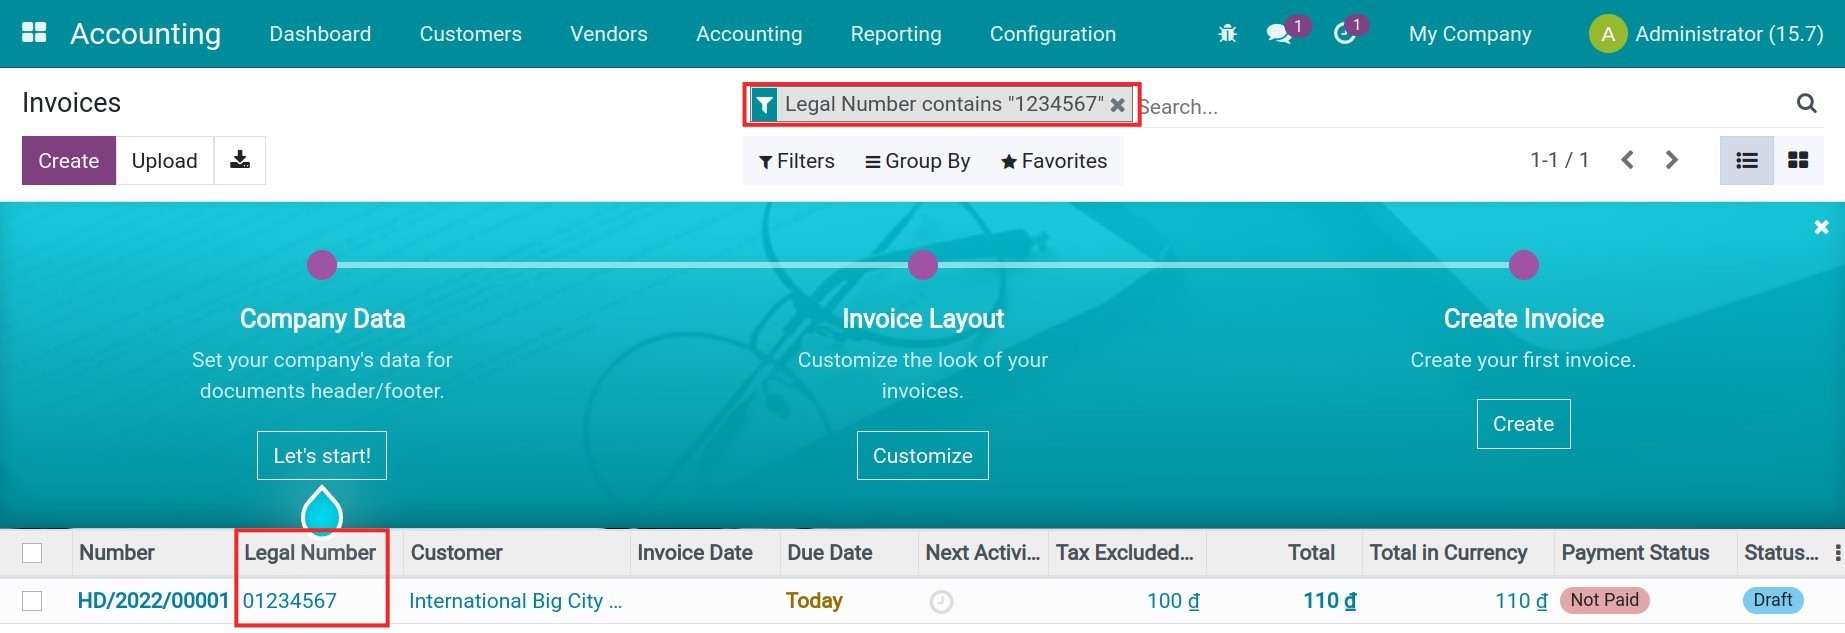 Search for invoices using legal number Viindoo